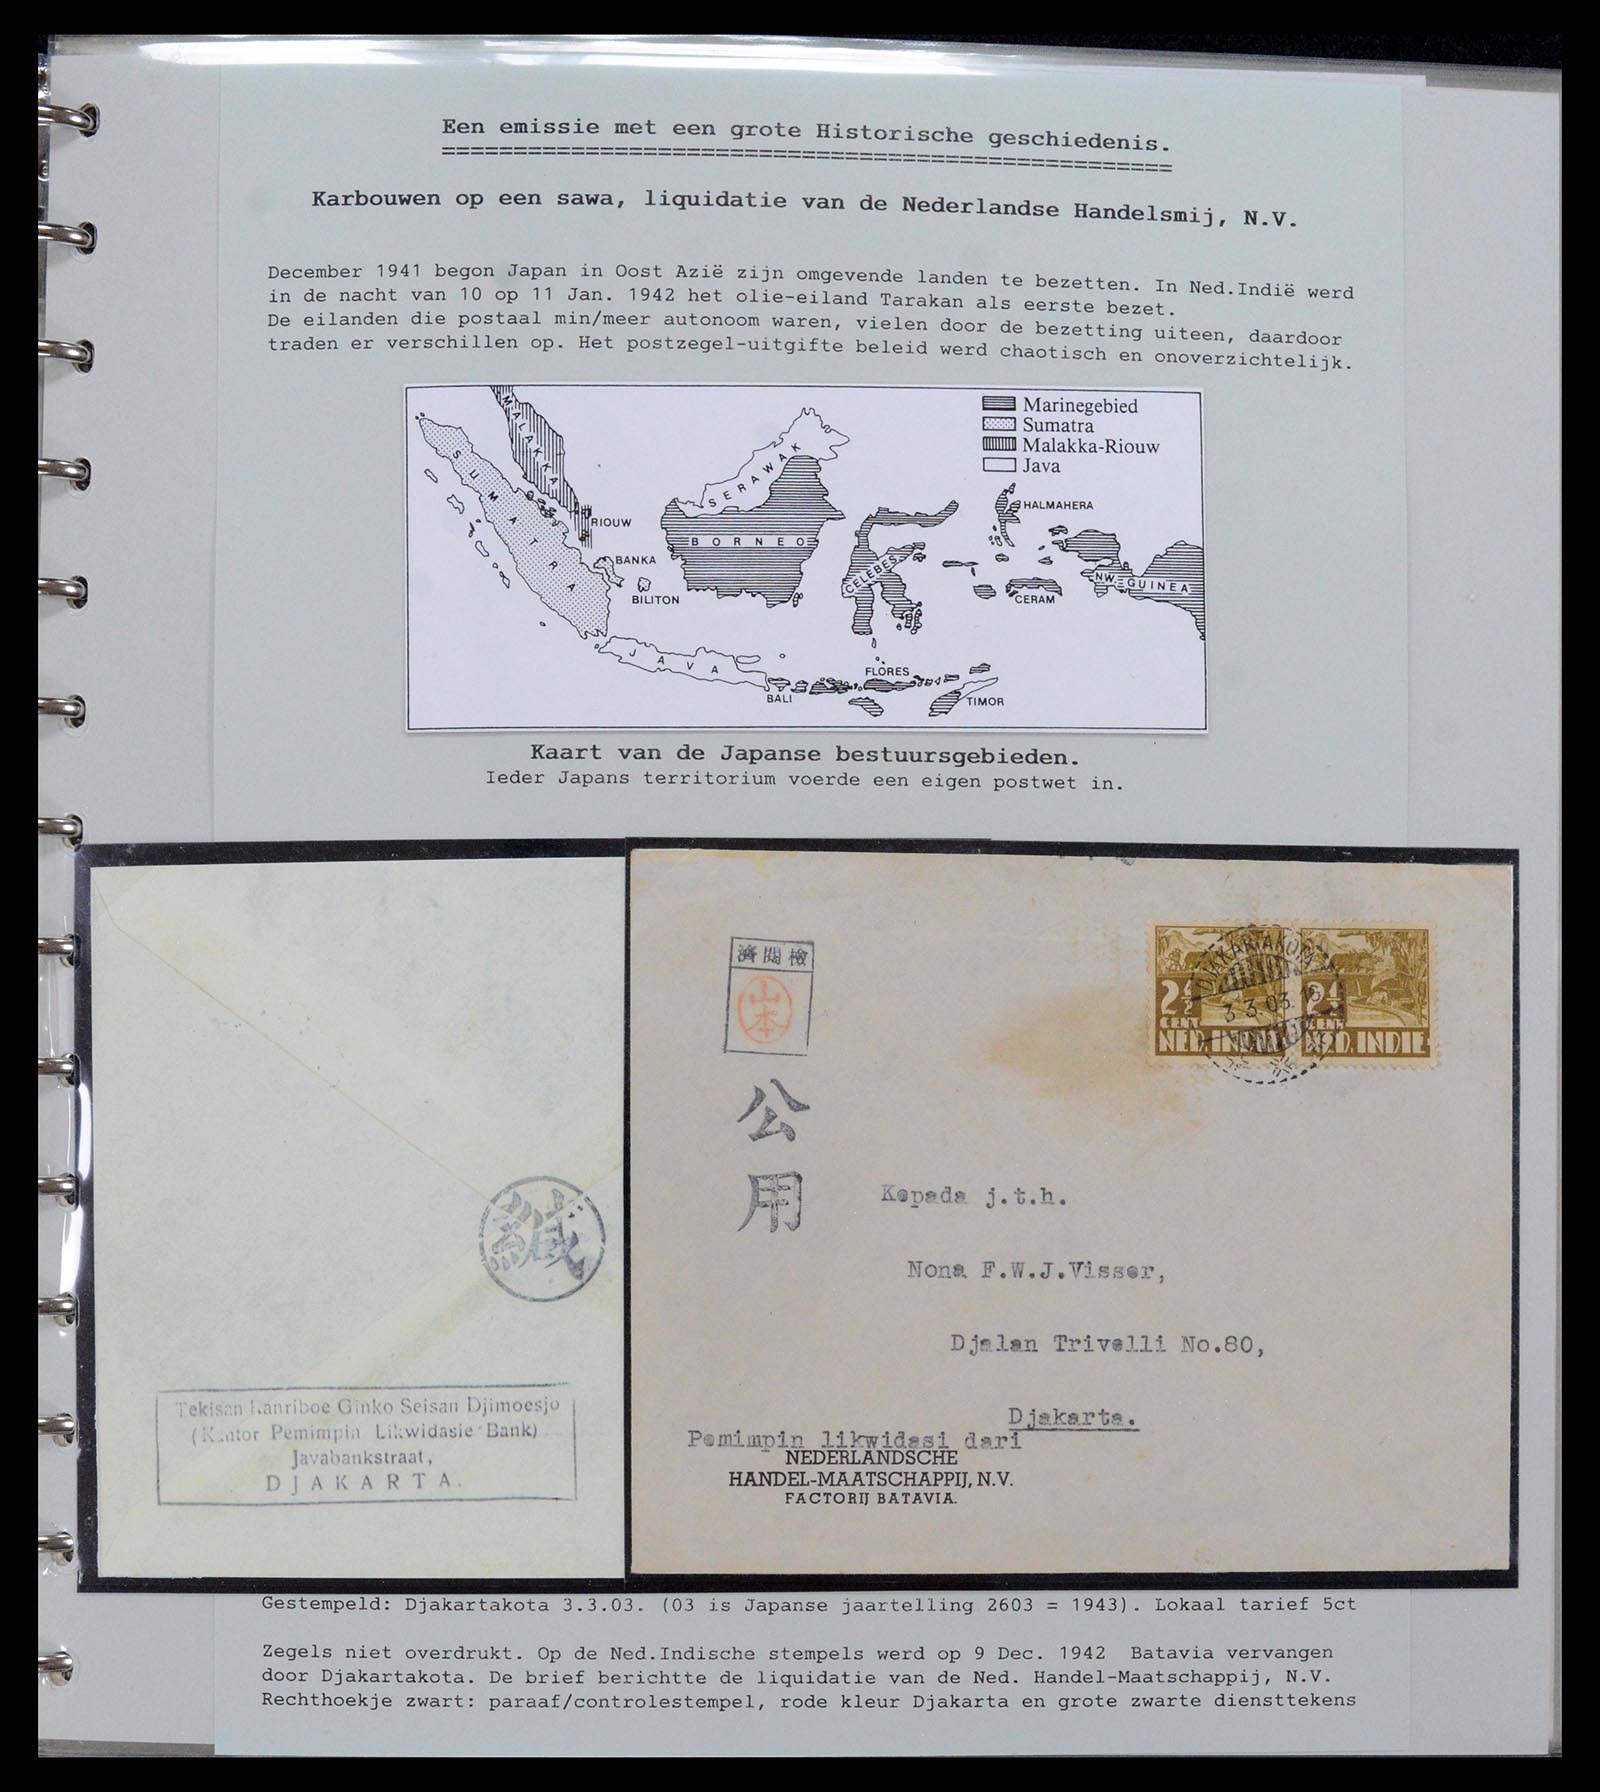 37689 002 - Stamp collection 37689 Japanese occupation Dutch East Indies and interim